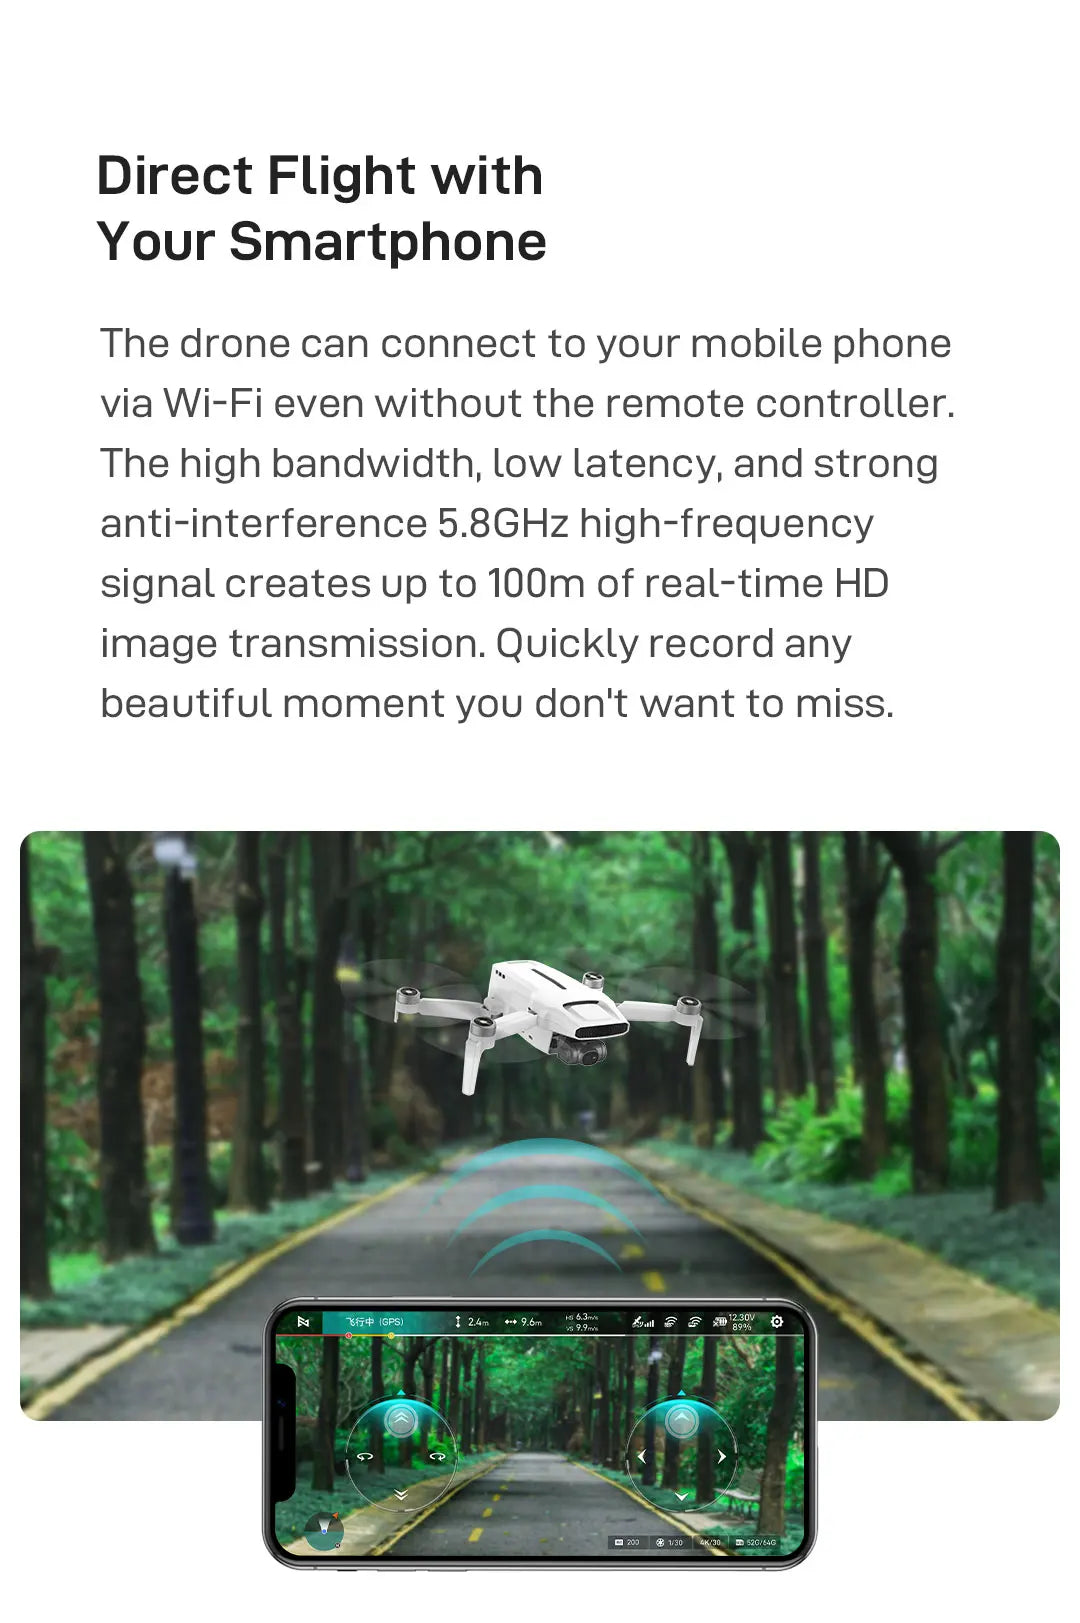 FIMI x8 Mini Pro Camera Drone, the drone can connect to your mobile phone via Wi-Fi even without the remote controller .